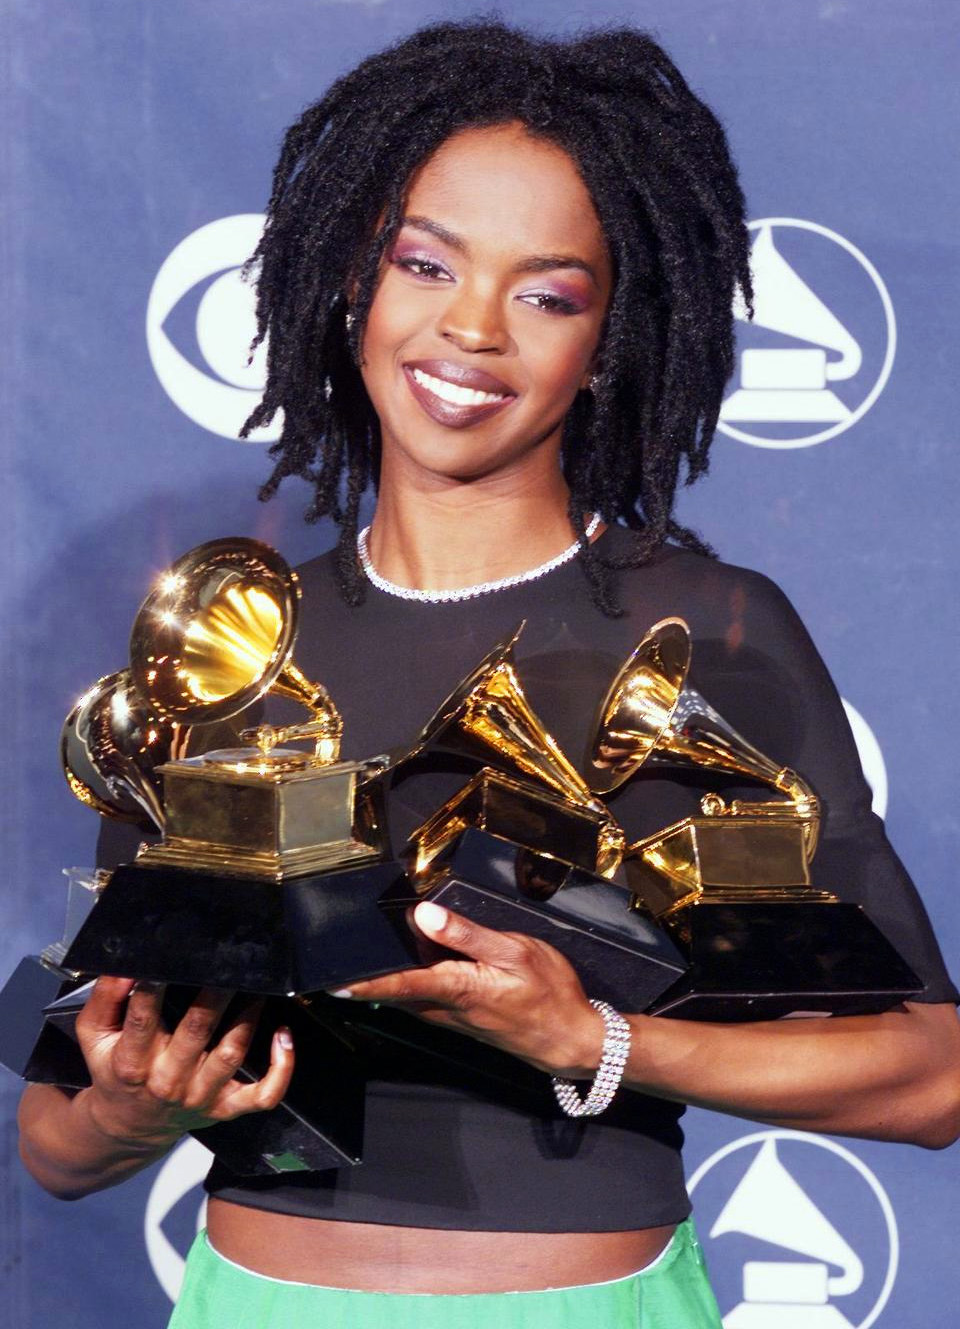  Lauryn Hill at the 41st Grammy Awards, 1999: Album of the Year (The Miseducation